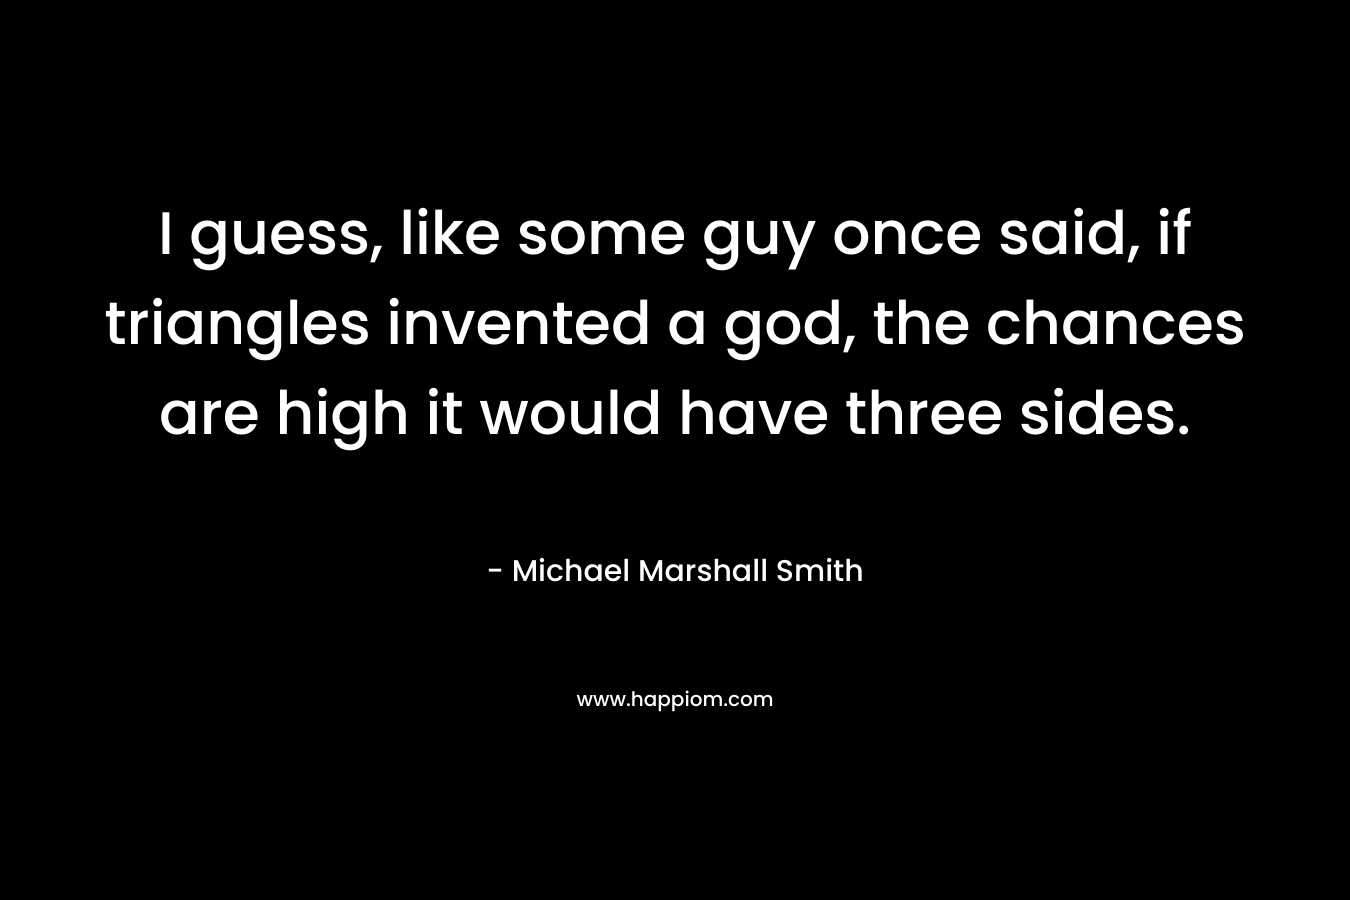 I guess, like some guy once said, if triangles invented a god, the chances are high it would have three sides. – Michael Marshall Smith